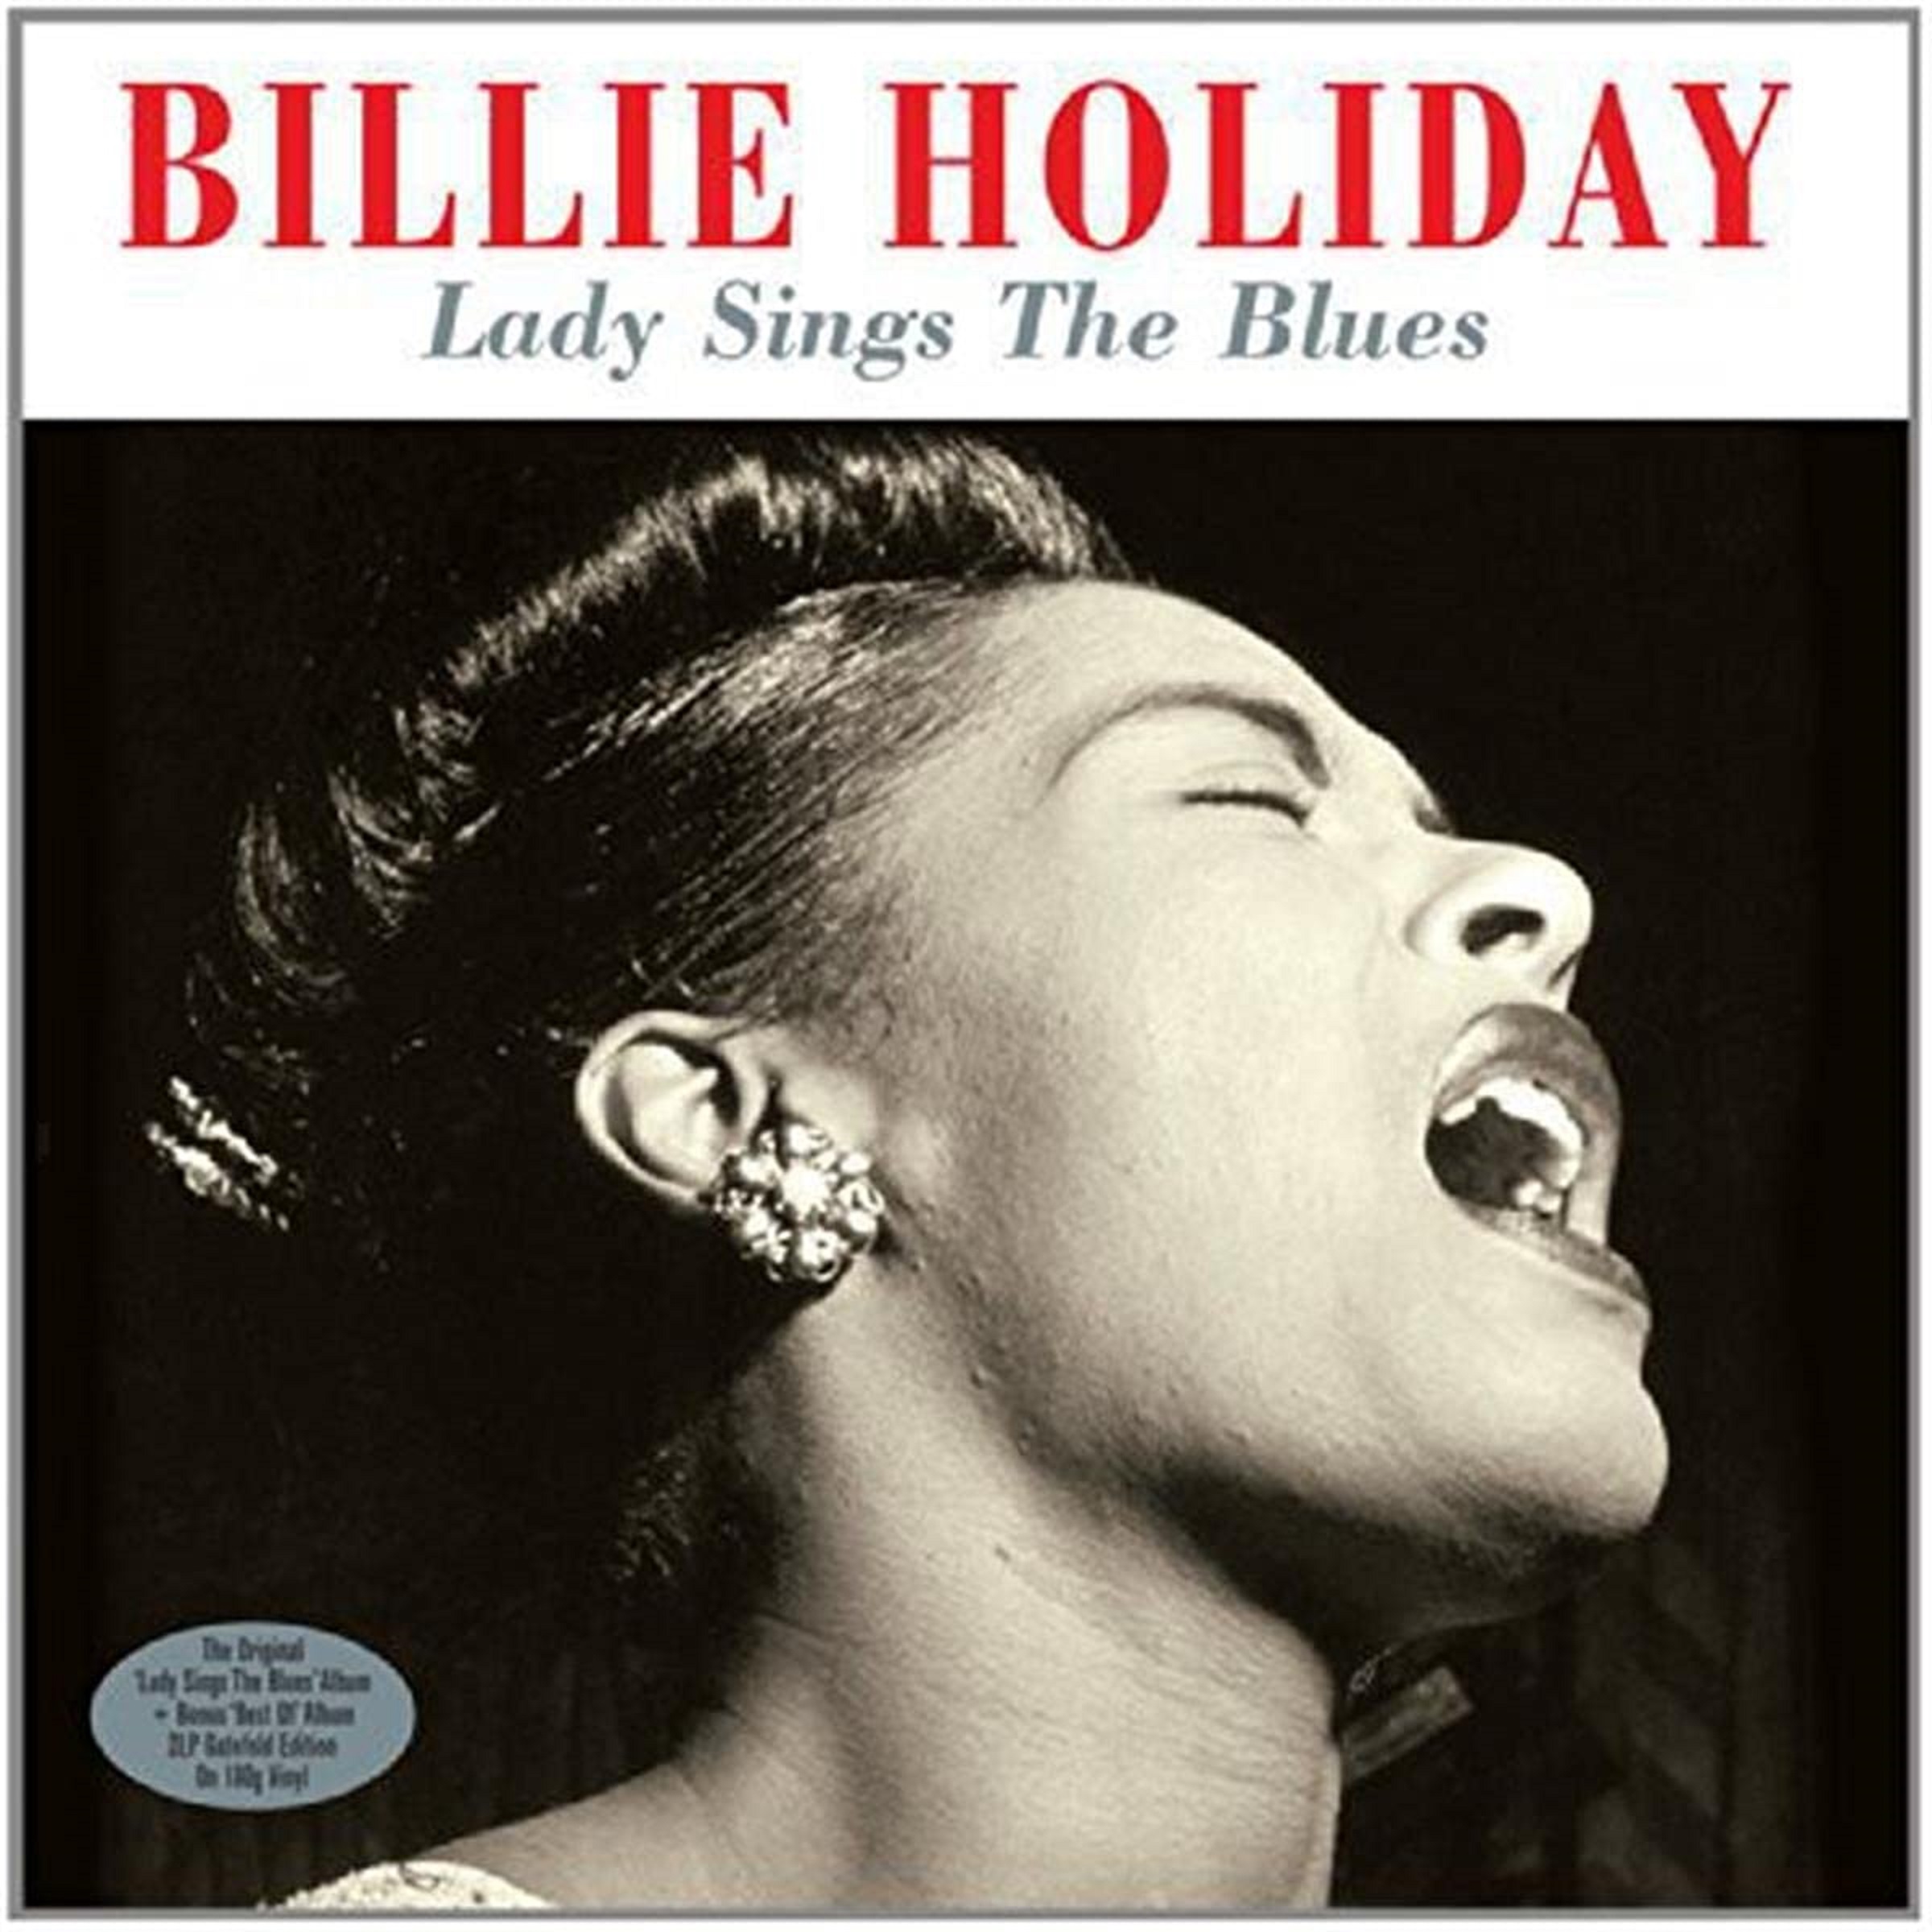 Singing the Blues, Touching the Soul: Remembering Billie Holiday